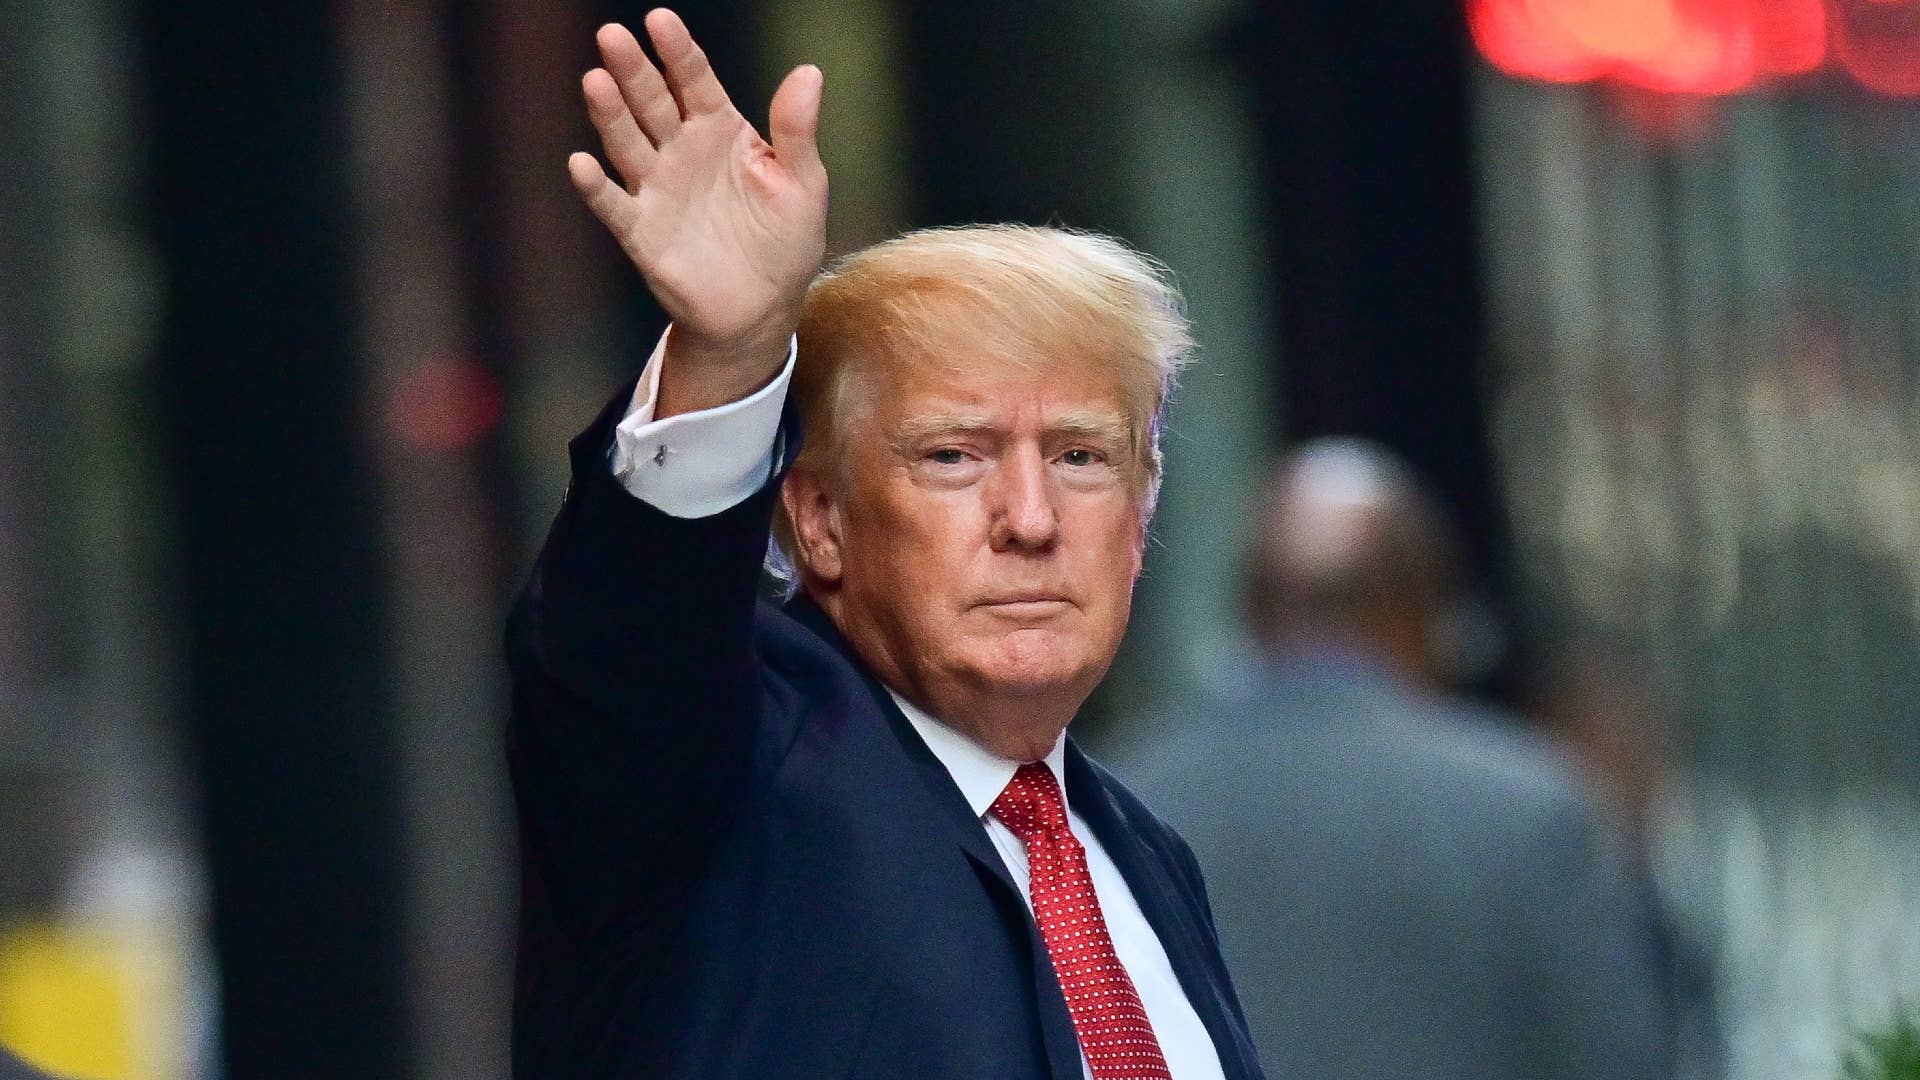 Donald Trump is pictured waving at the camera